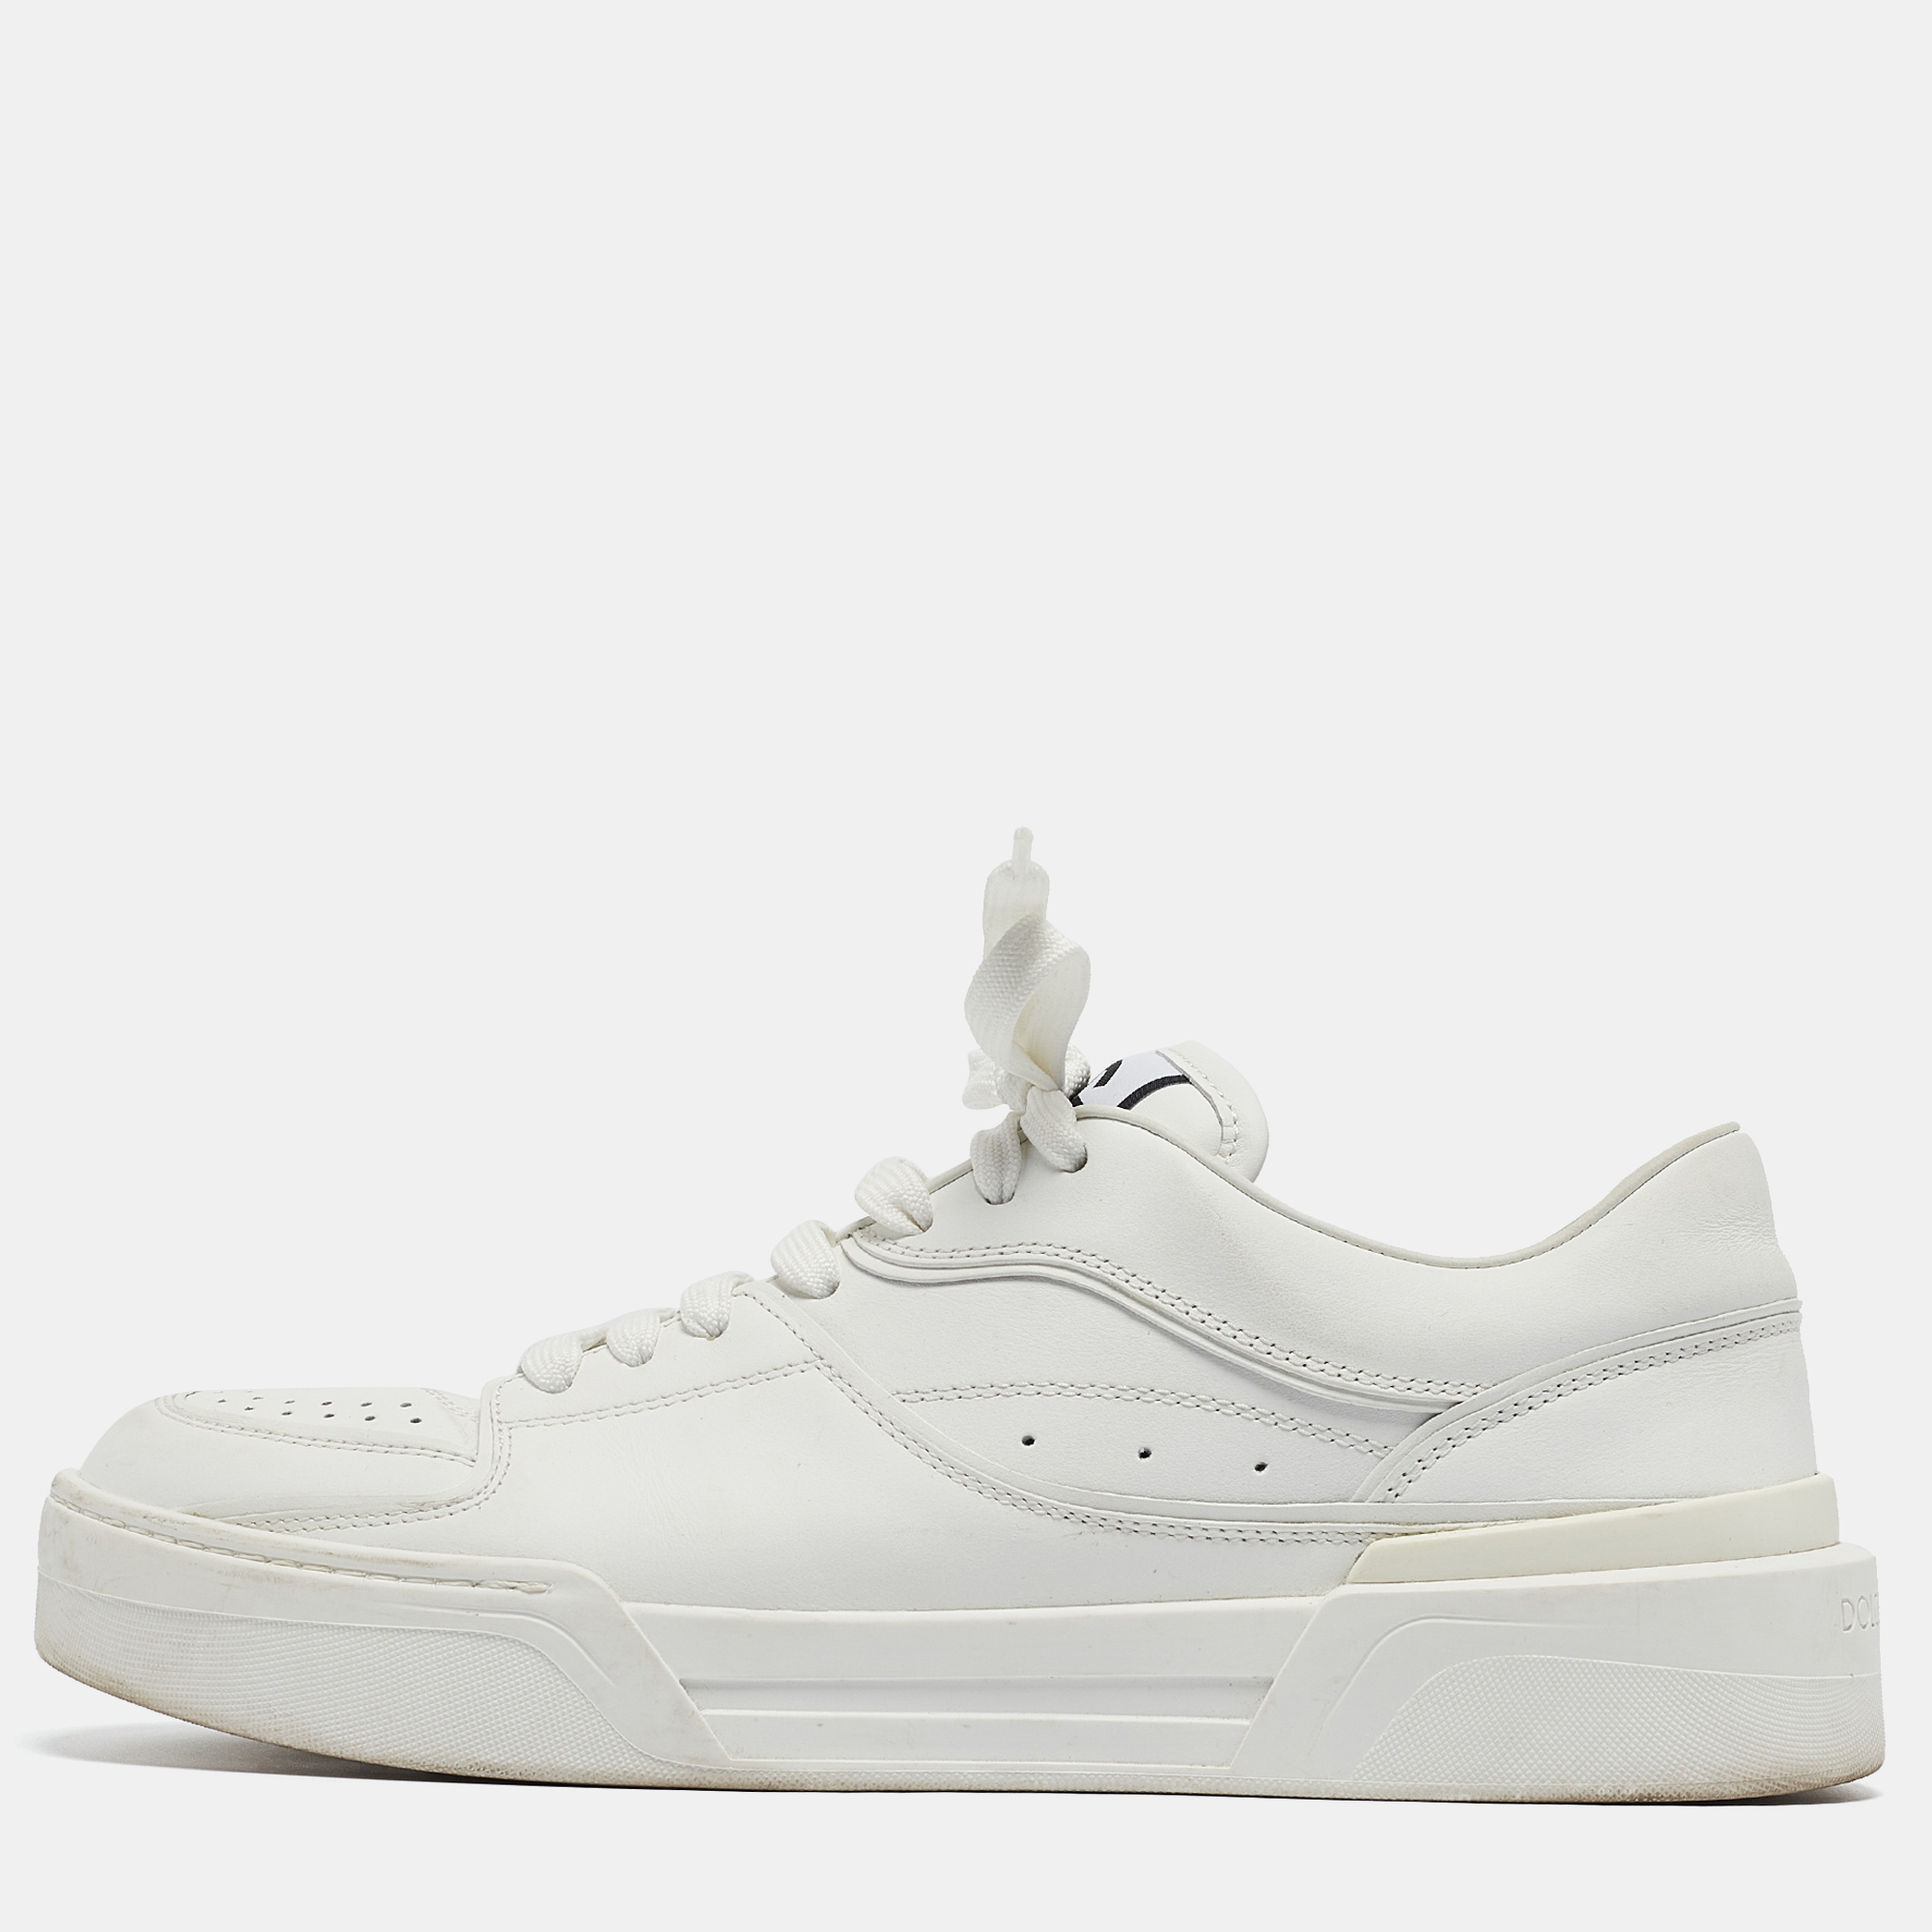 Dolce & gabbana white leather low top sneakers size 42.5